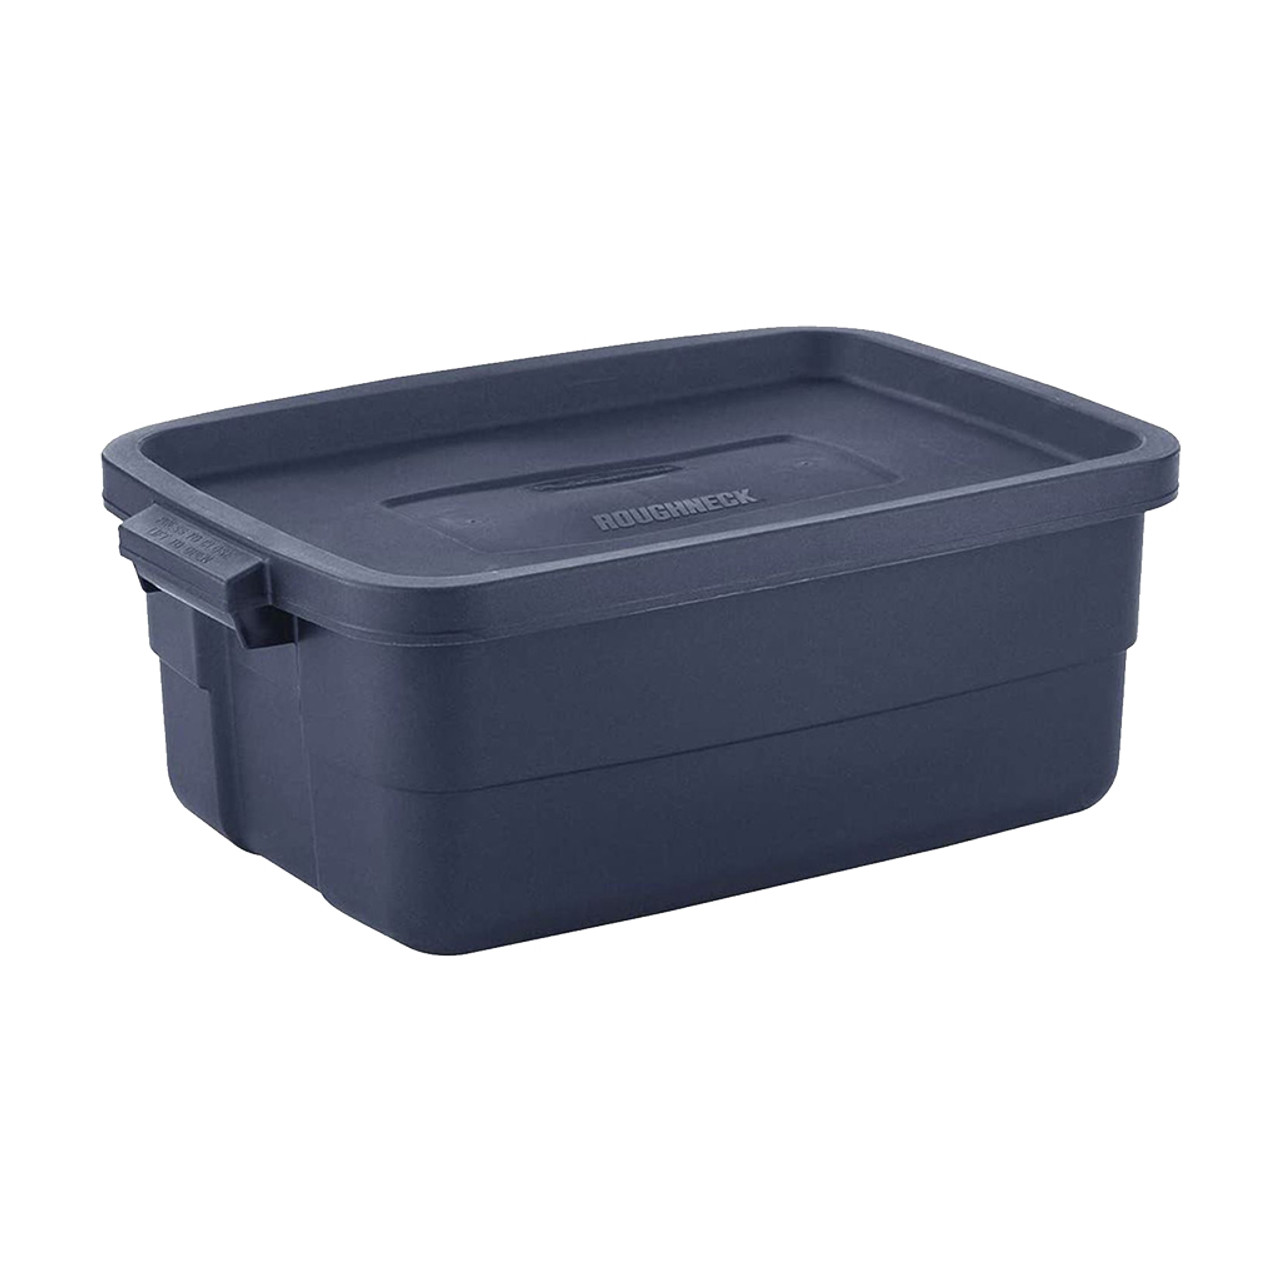 Rubbermaid Roughneck Storage Tote, 14 Gallon - Midwest Technology Products